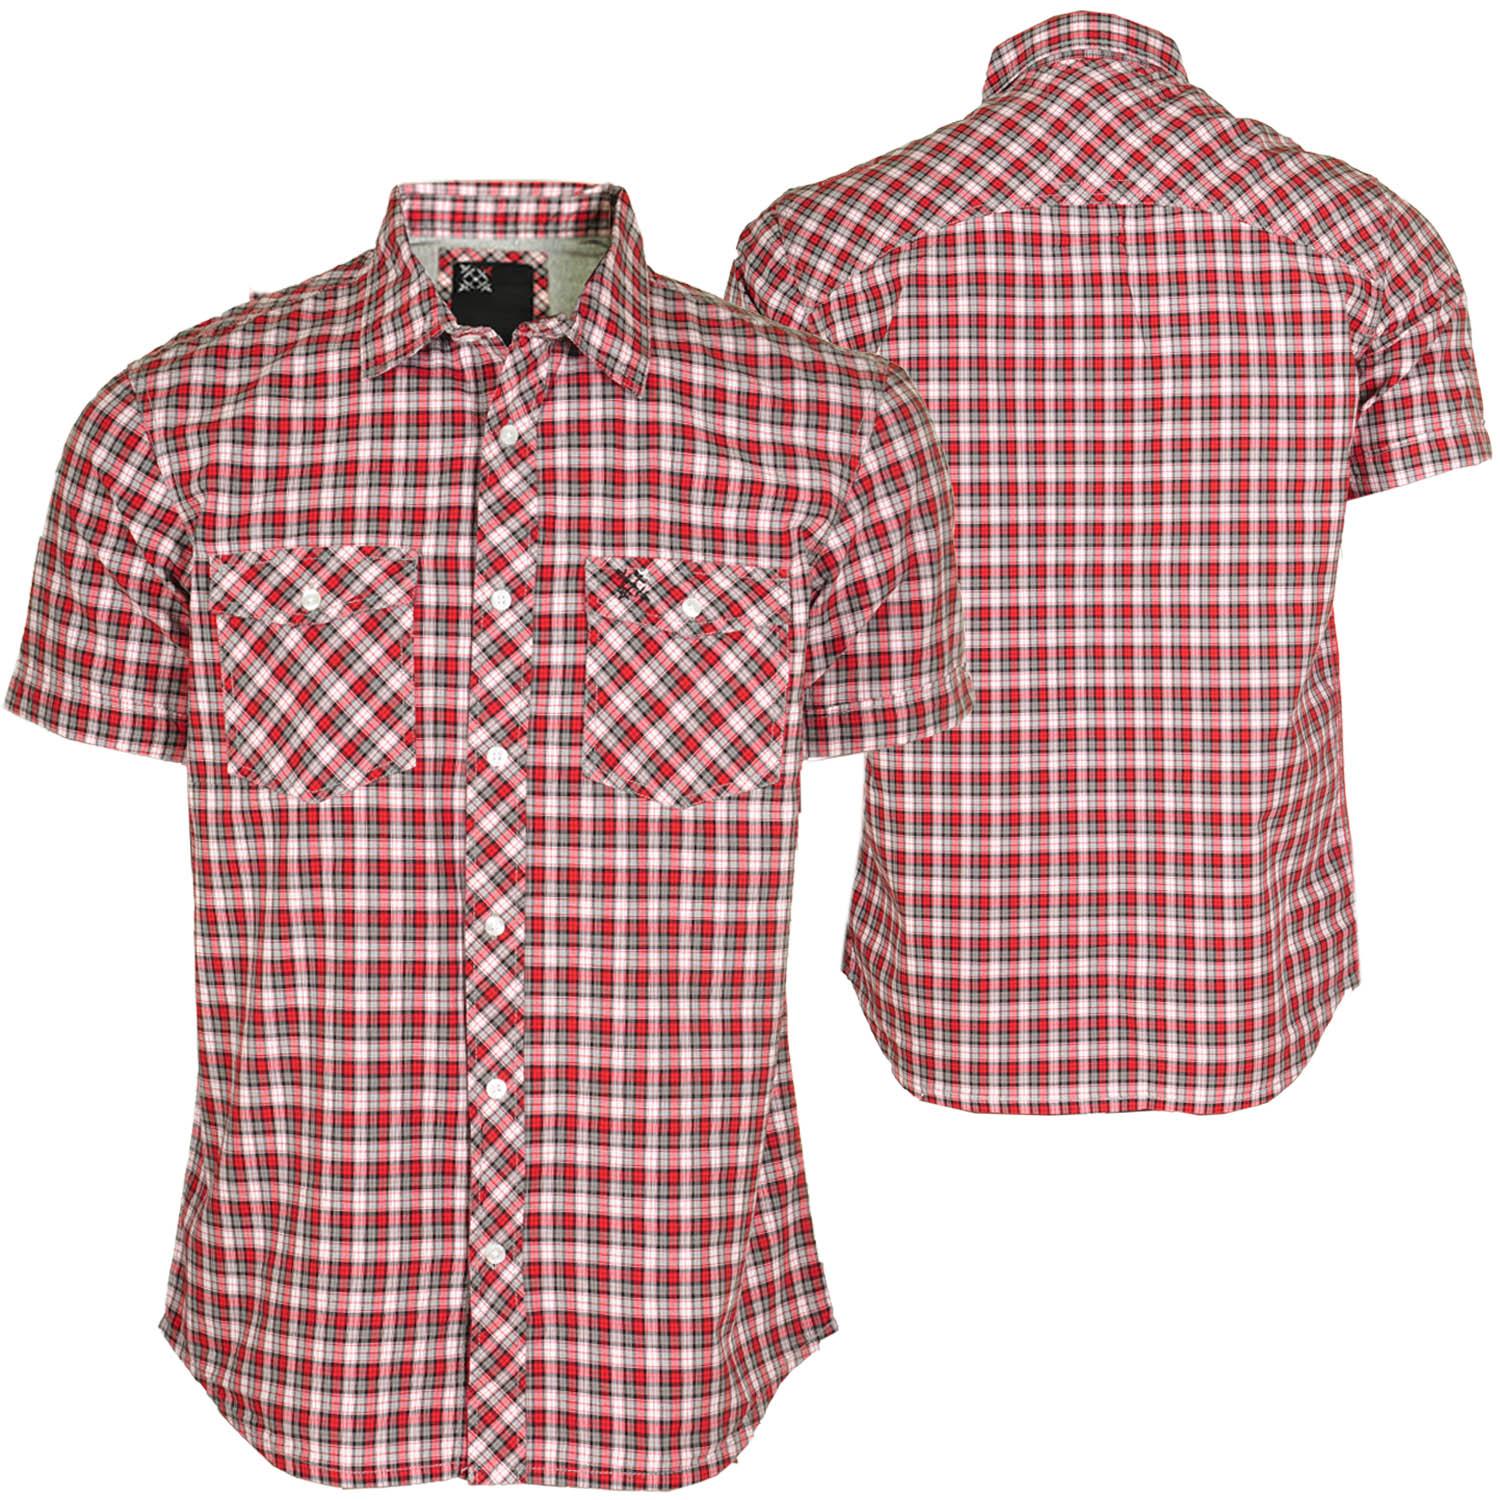 Foto Oxbow Curreaux Tisses Hombres Camisas Rojo Multicullor foto 644014